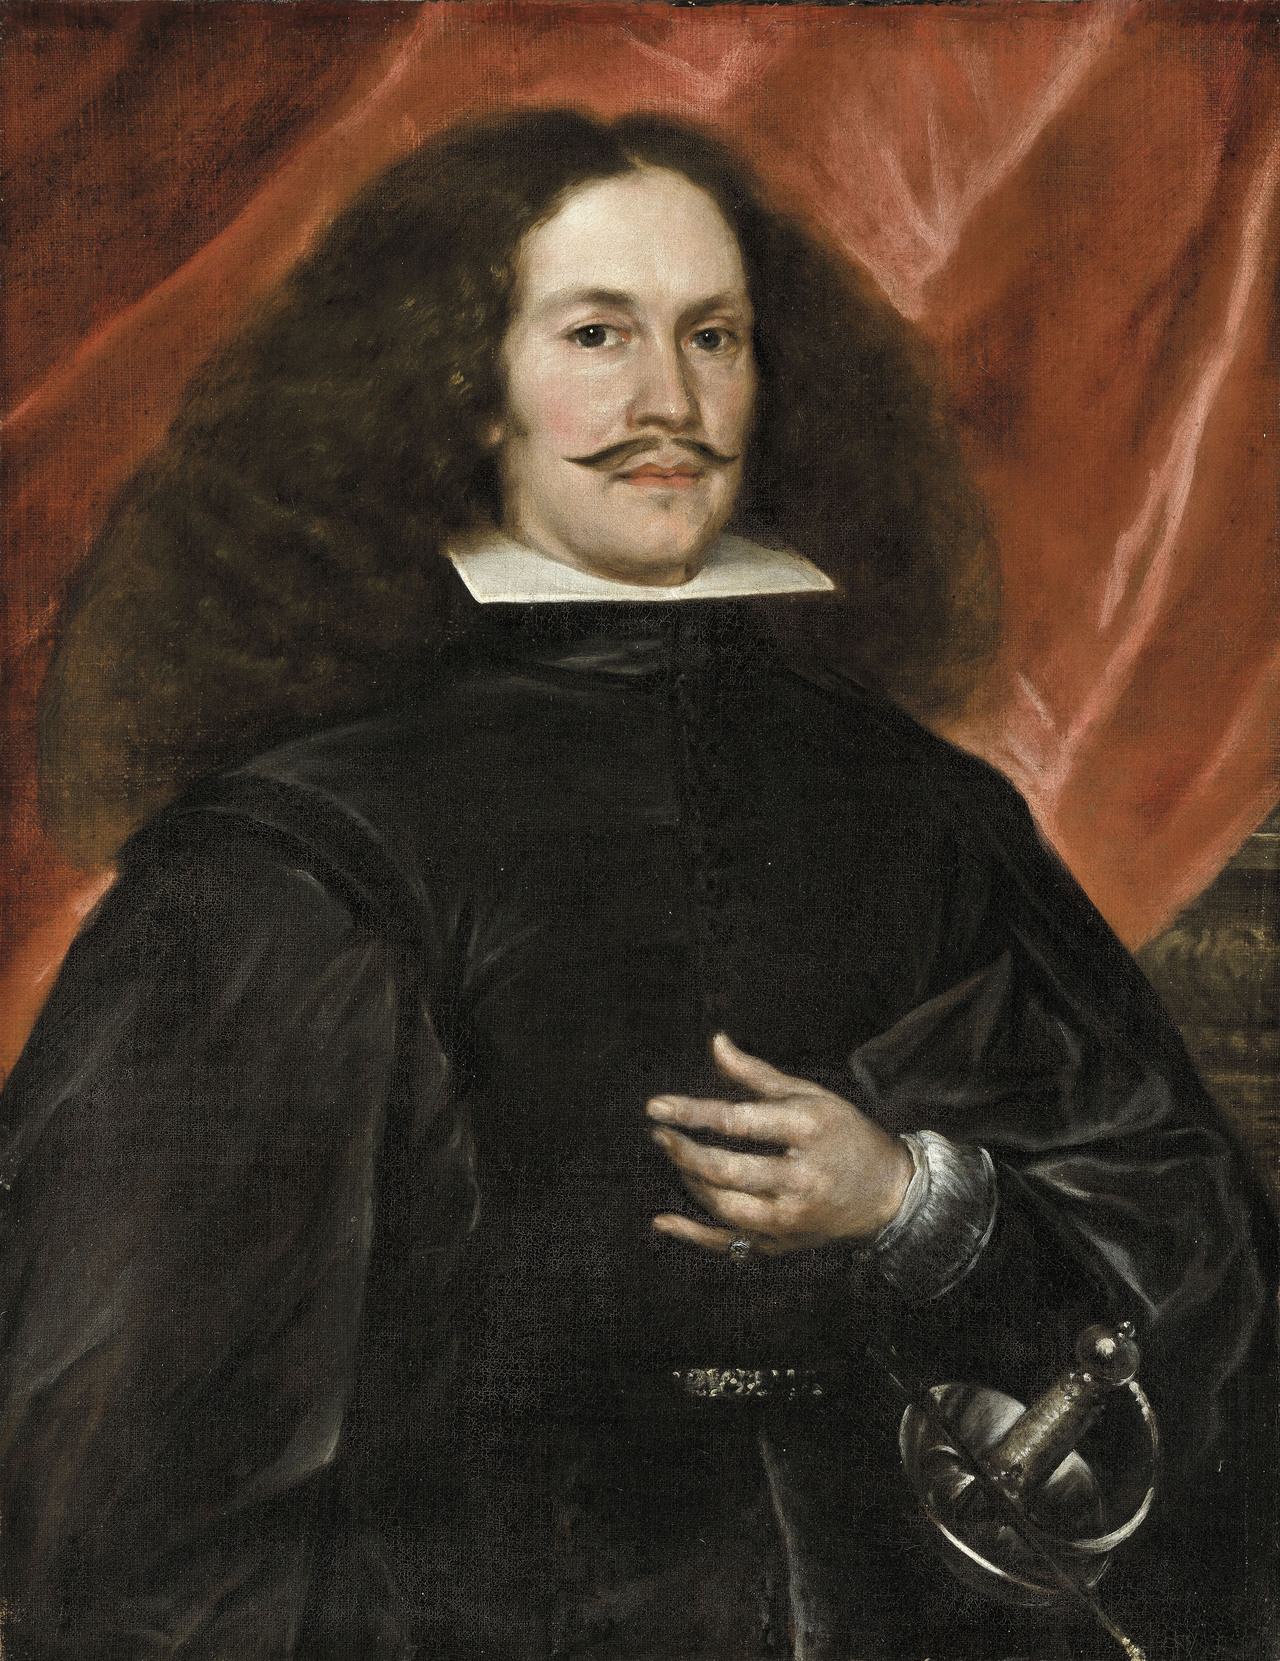 Circle of Diego Rodriguez de Silva y Velazquez (1599-1660), â€˜Portrait of a Gentleman in black with a swordâ€™, oil on canvas, 1600s, Spanish, for sale est. 15,000-20,000 GBP in Christieâ€™s Old Masters sale, July 2019